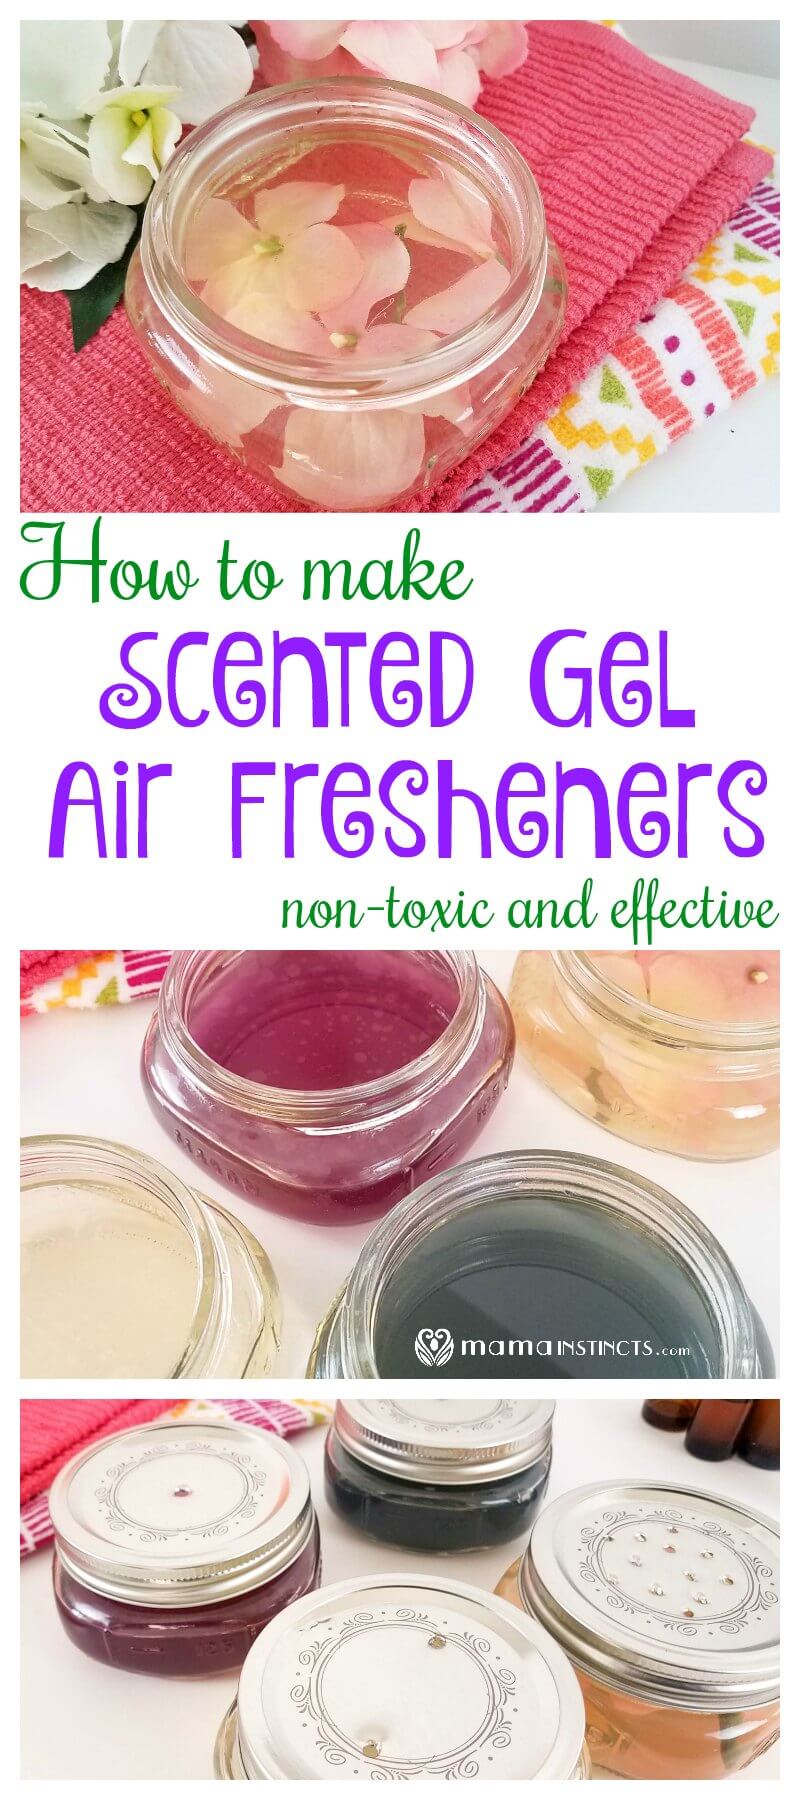 Did you know that most scented gels contain toxic chemicals? Learn how easy it is to make your own DIY homemade scented air freshener gel that is safe, non-toxic and effective.